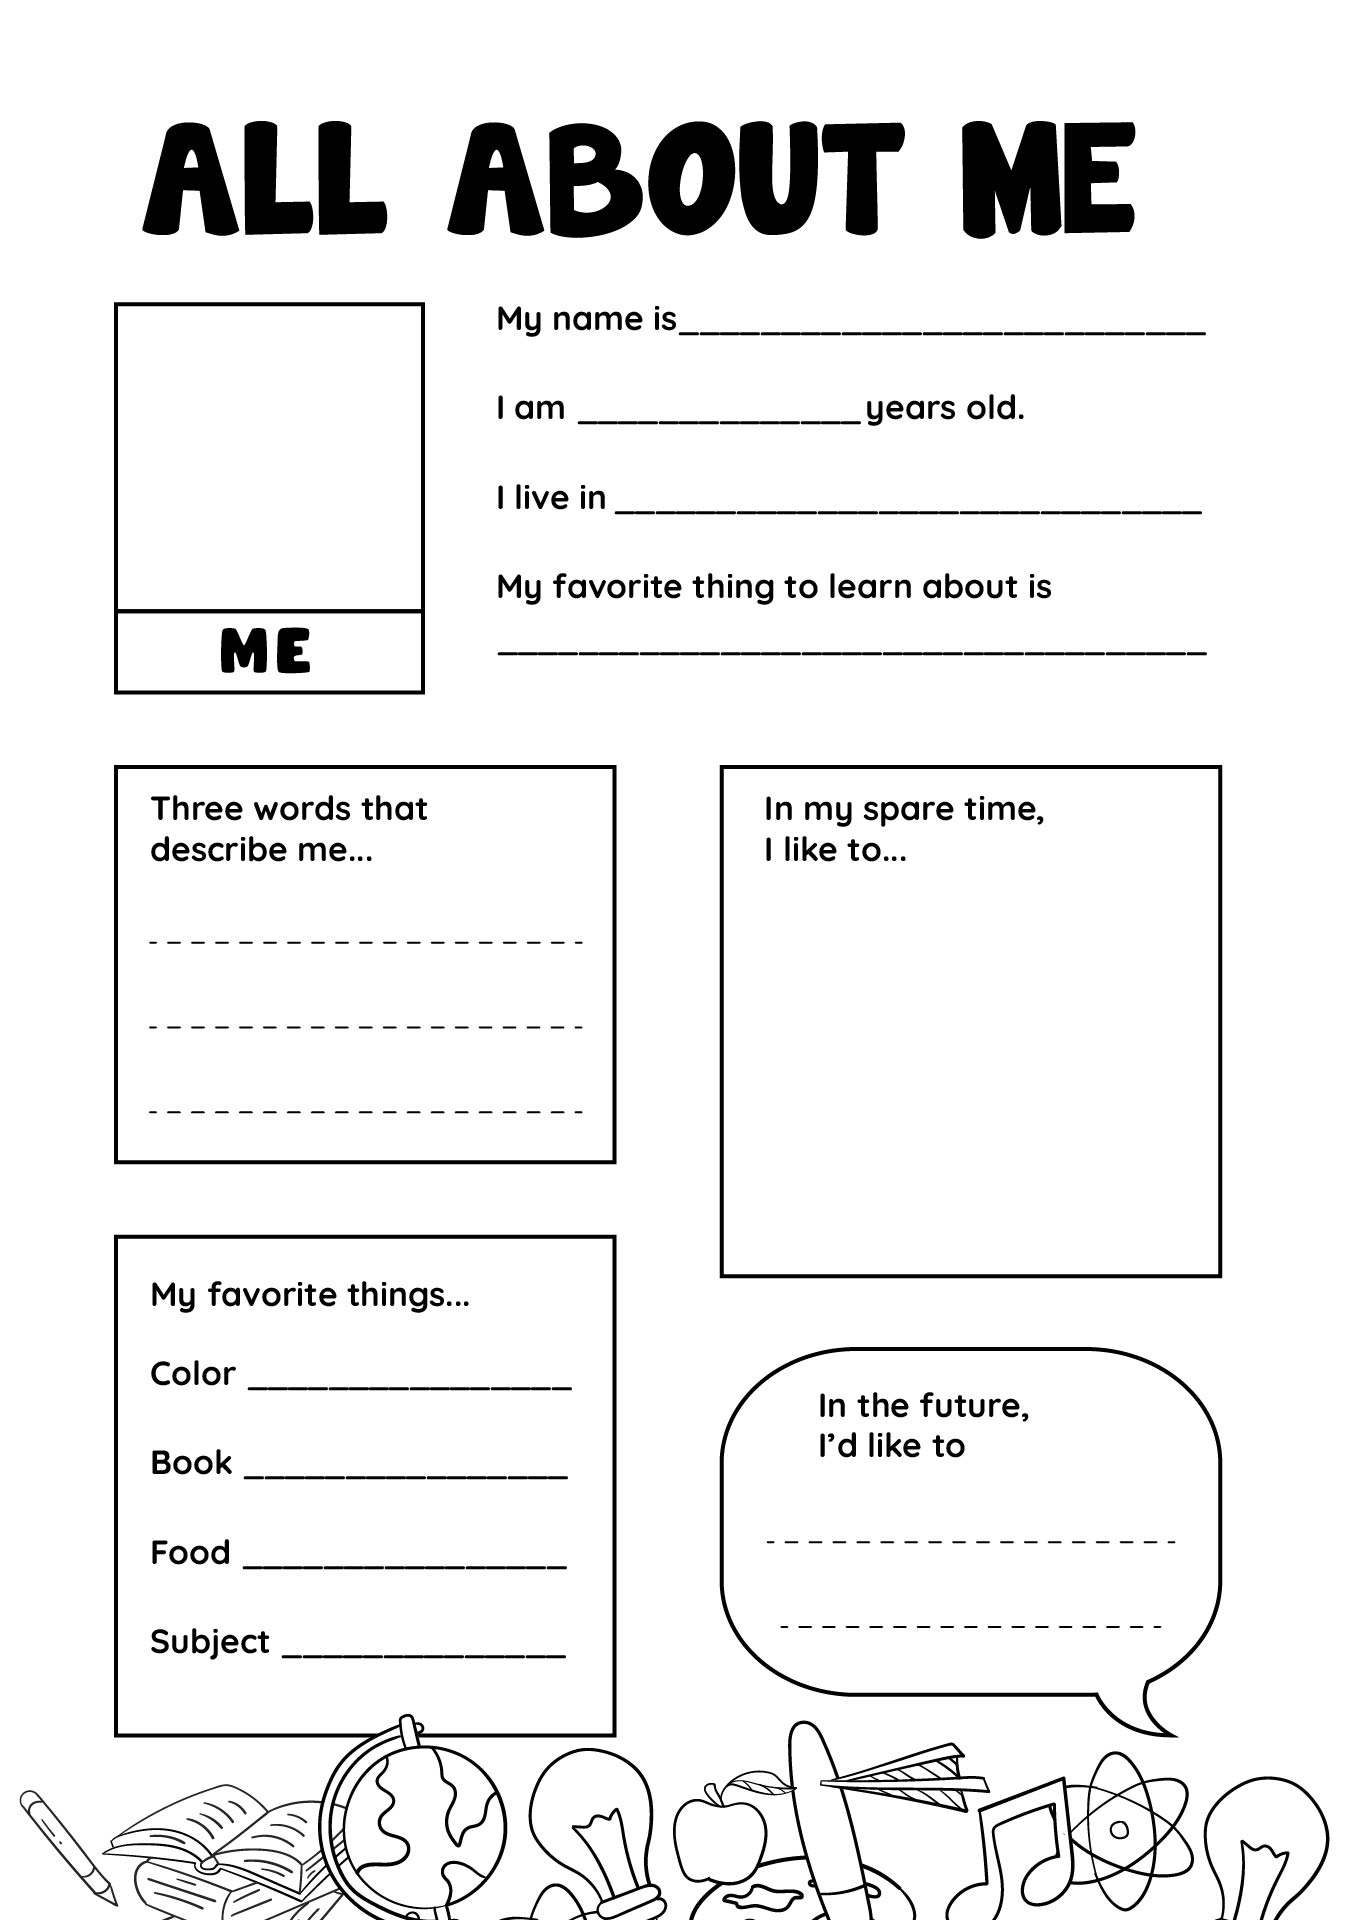 5-best-images-of-getting-to-know-yourself-worksheet-preschool-printable